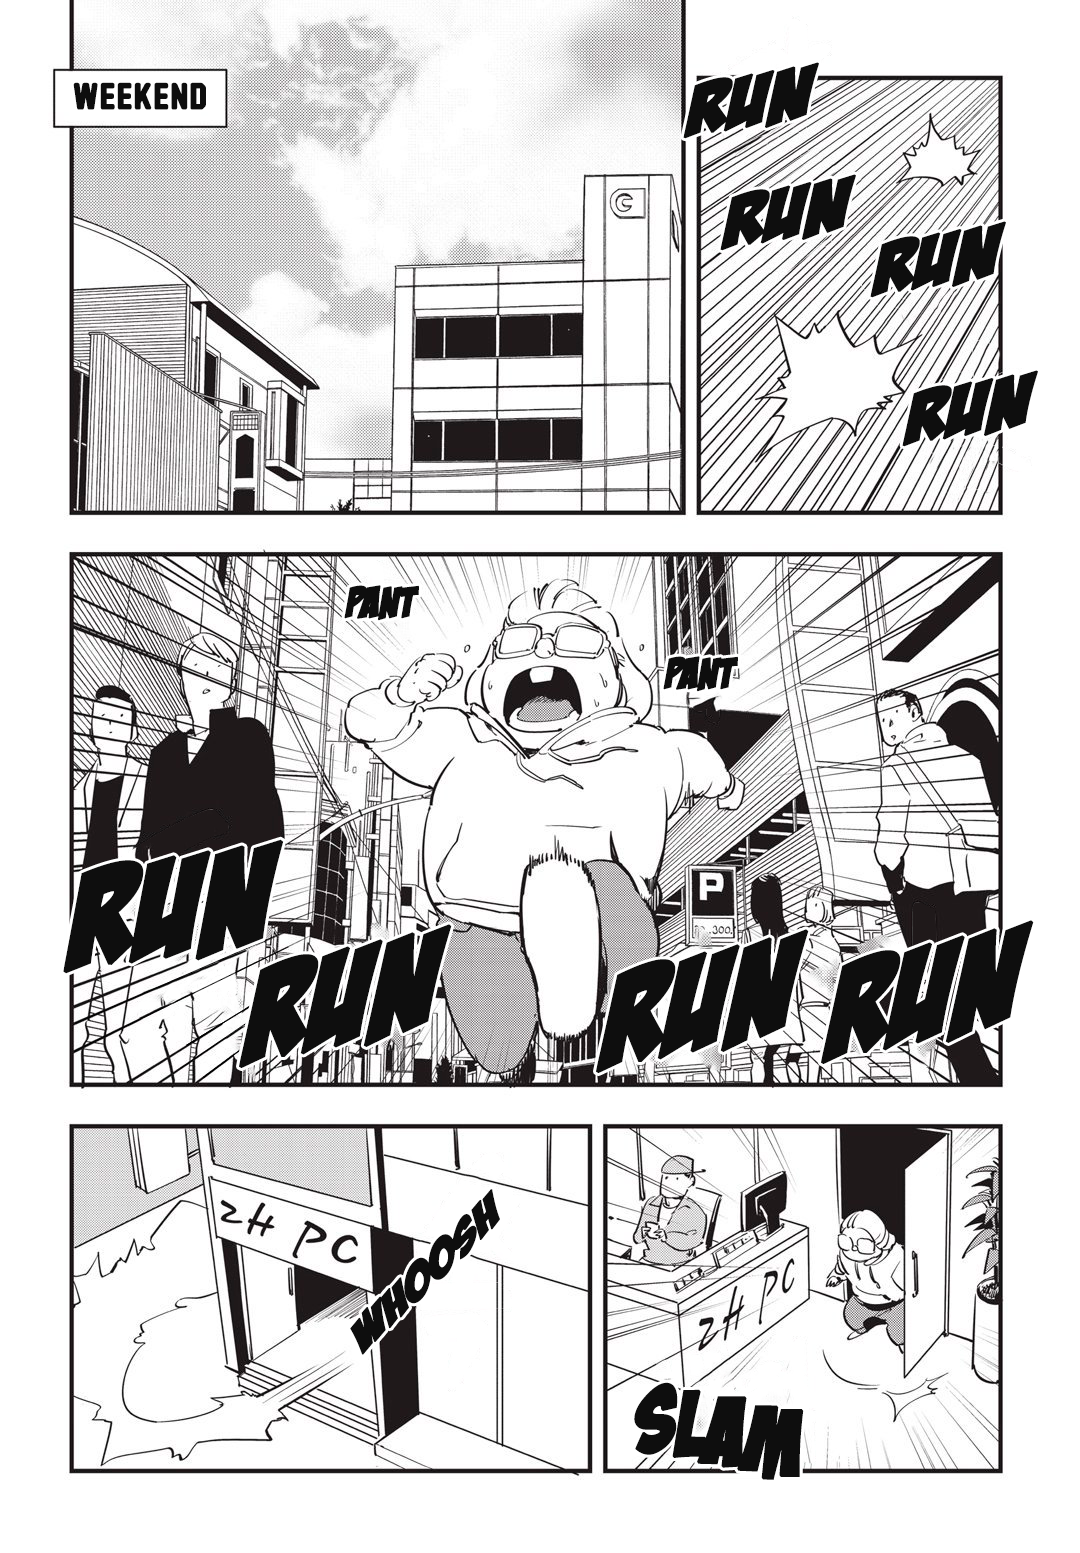 Fight Class 3 - Page 2